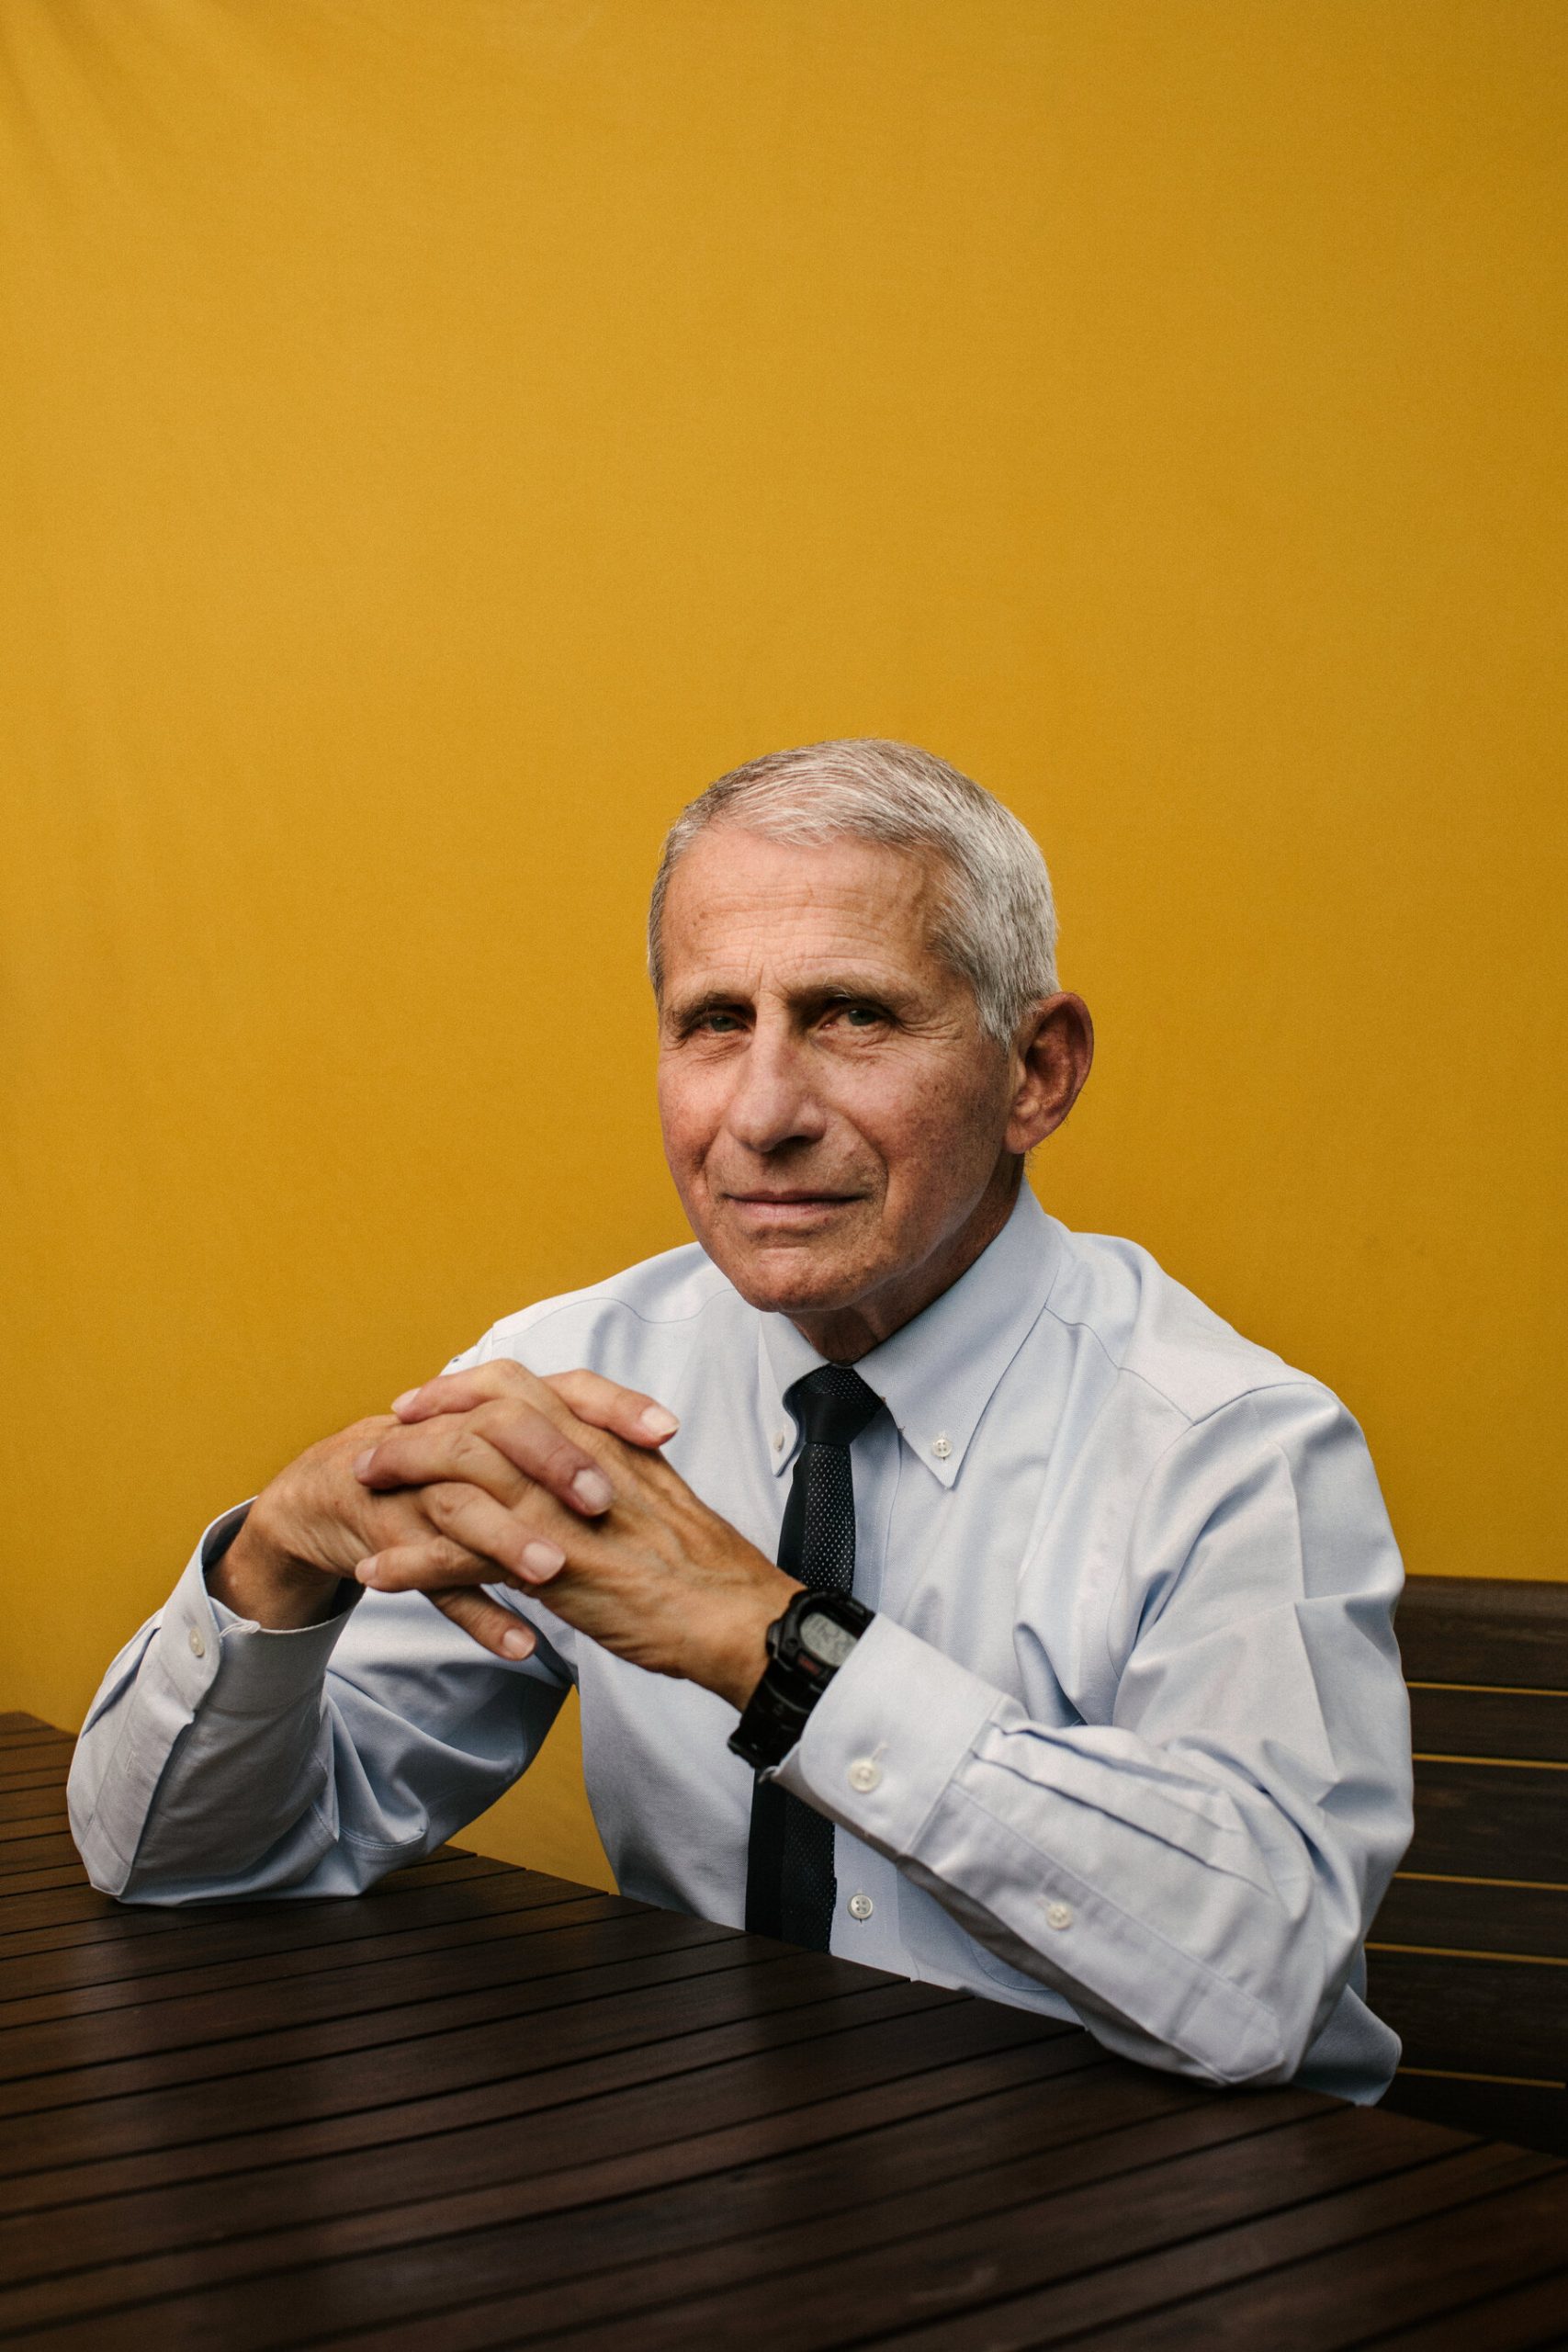 No vaccine lasts forever: Dr. Fauci